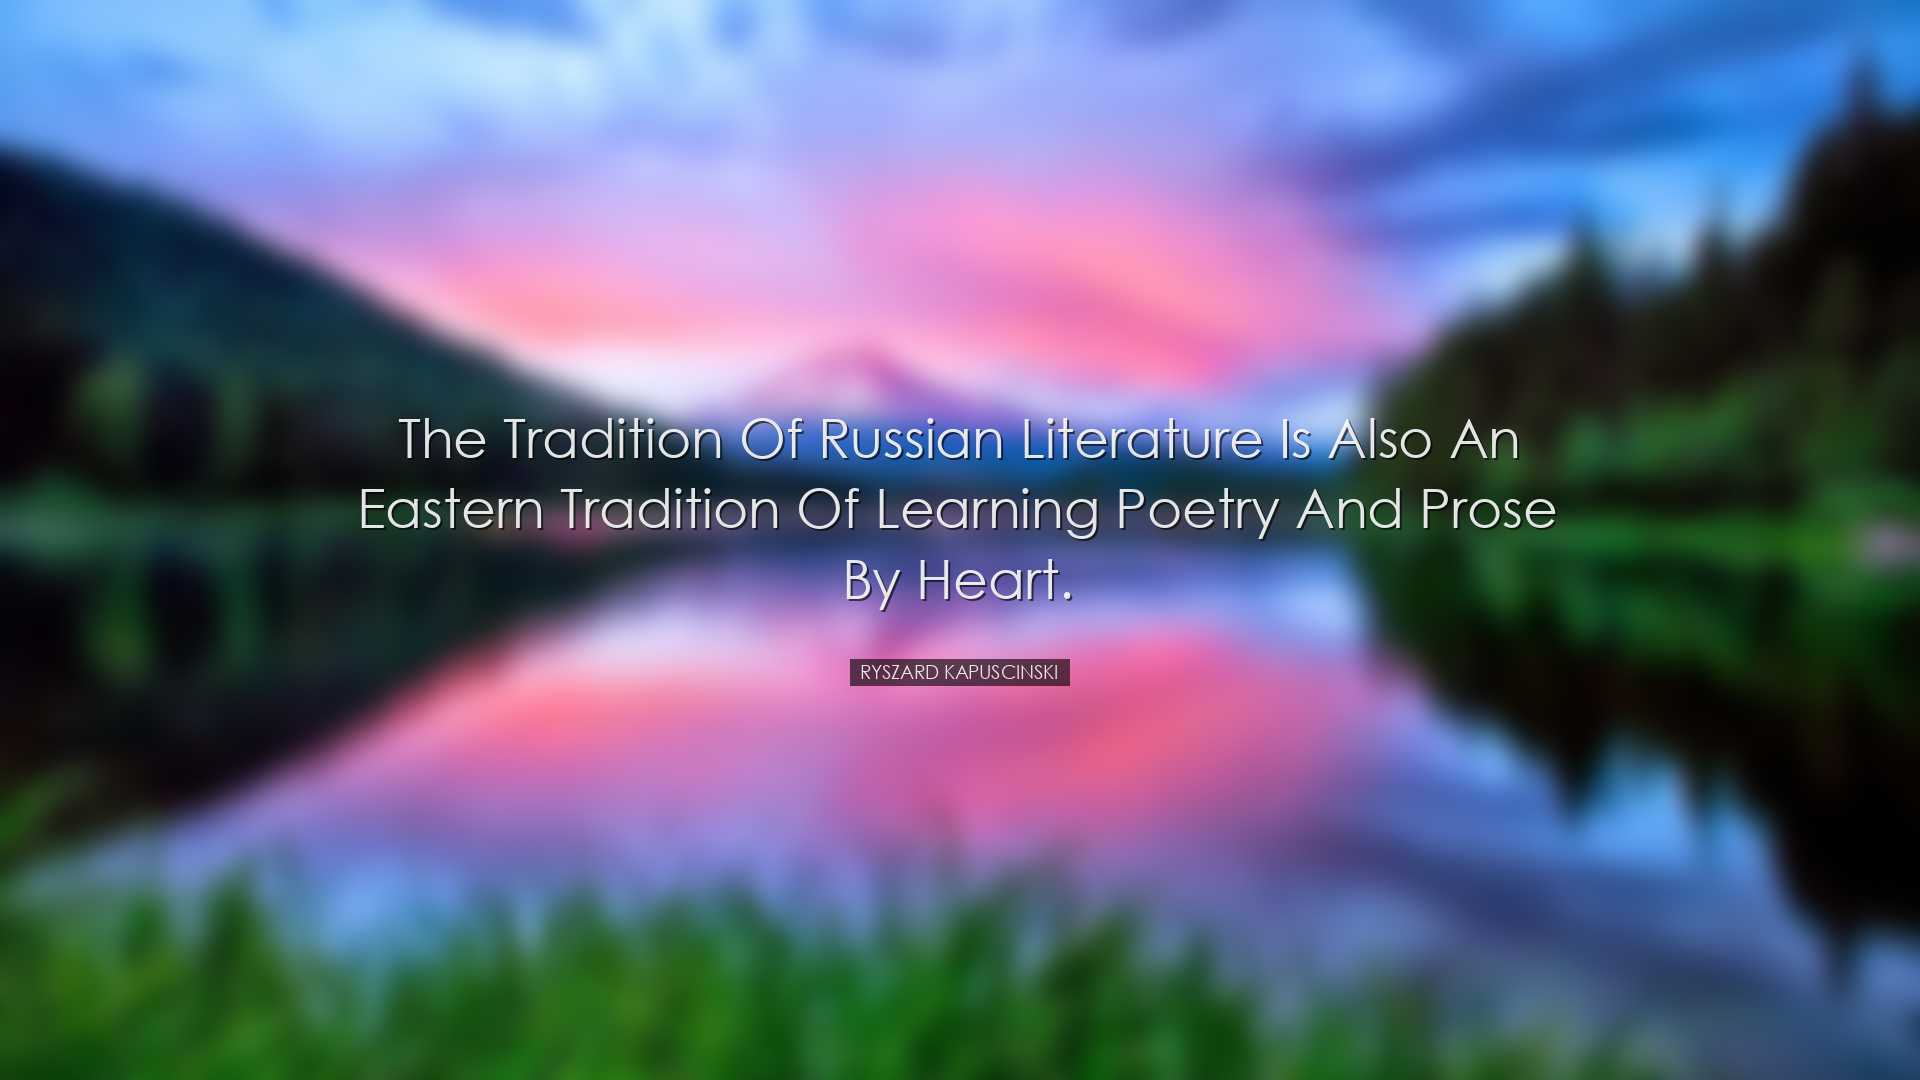 The tradition of Russian literature is also an eastern tradition o